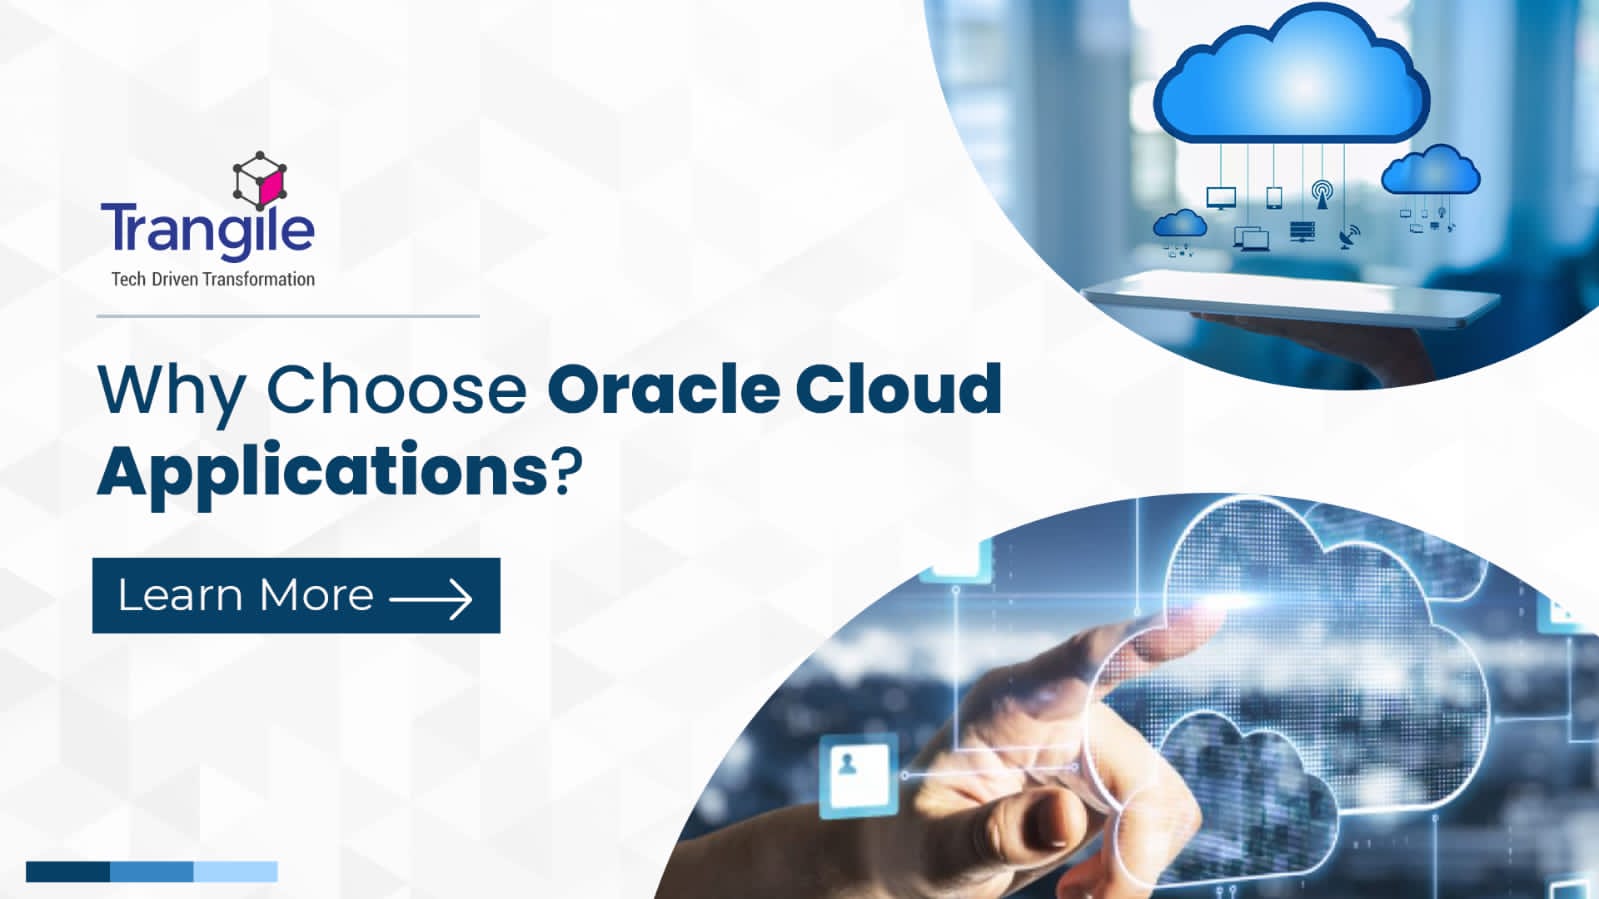 Why Choose Oracle Cloud Applications?